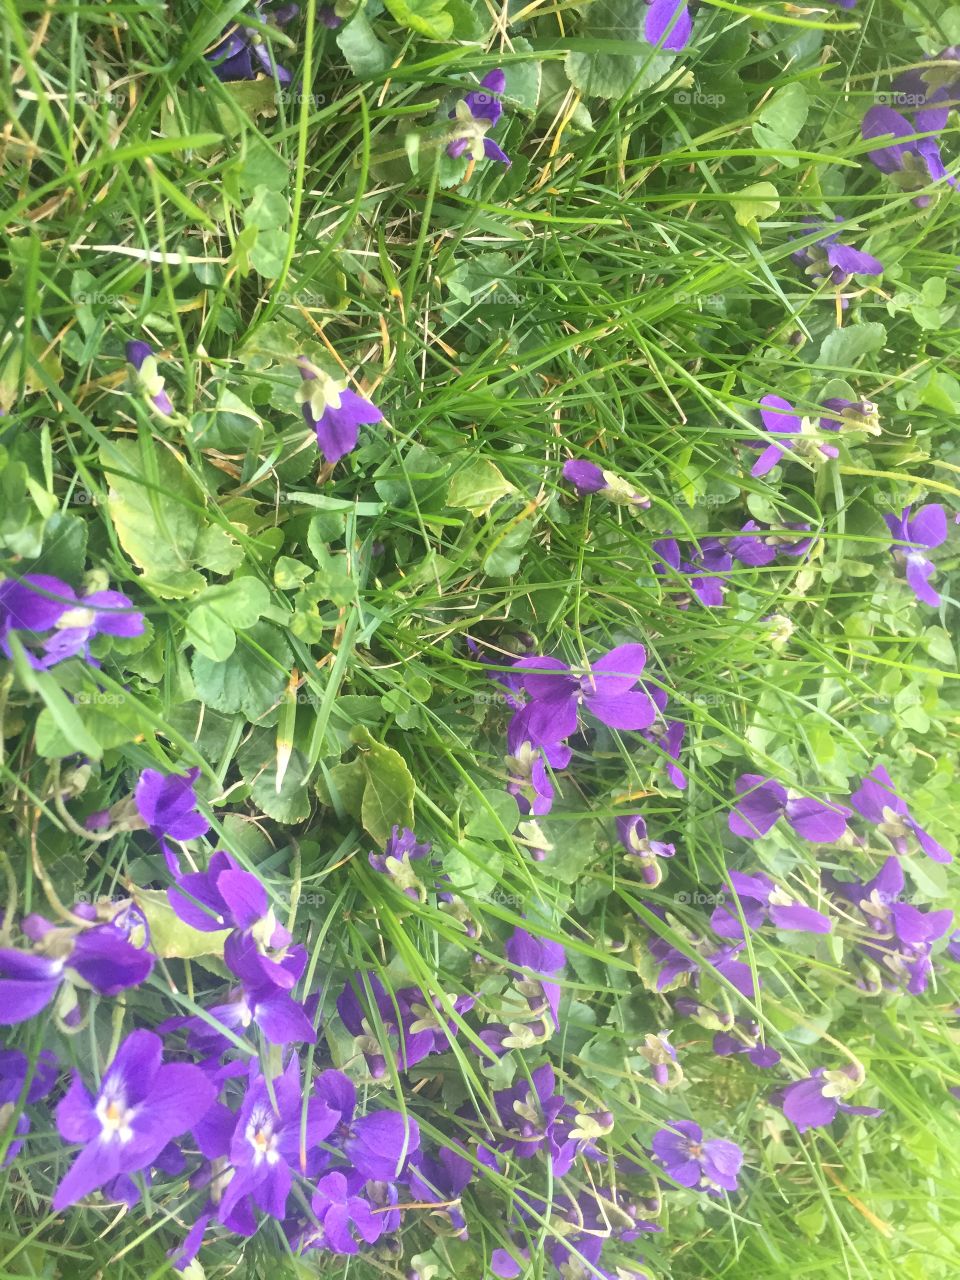 Windflowers growing in the grass